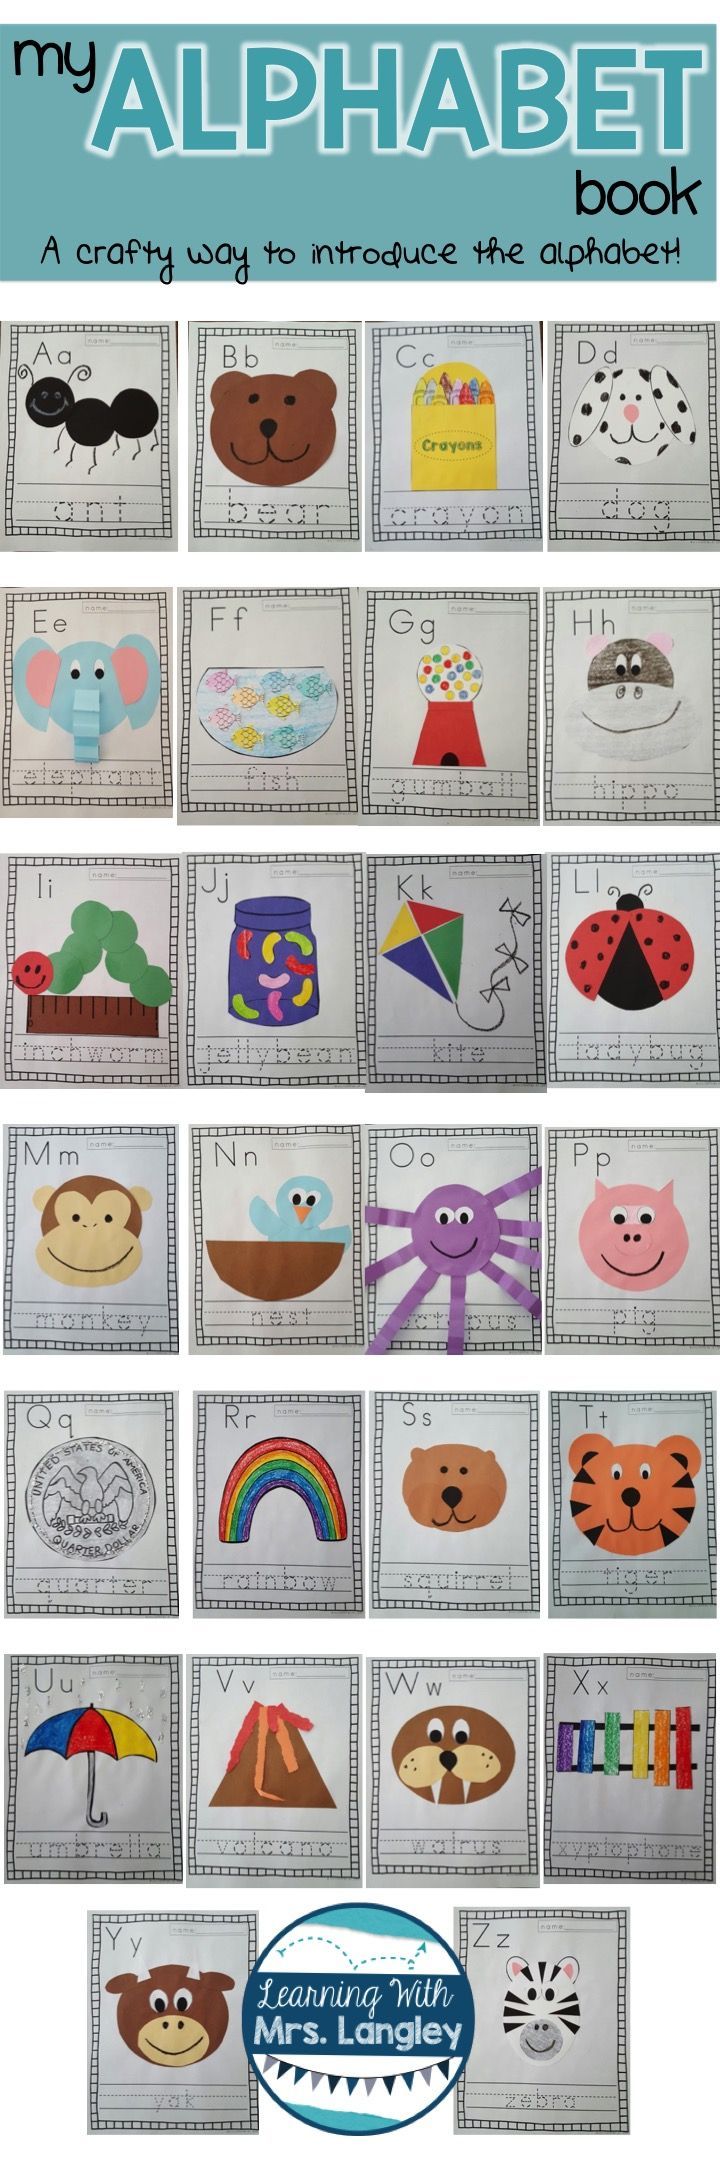 This alphabet book is a great way to introduce the alphabet during the first weeks of school. Introduce a letter a day and